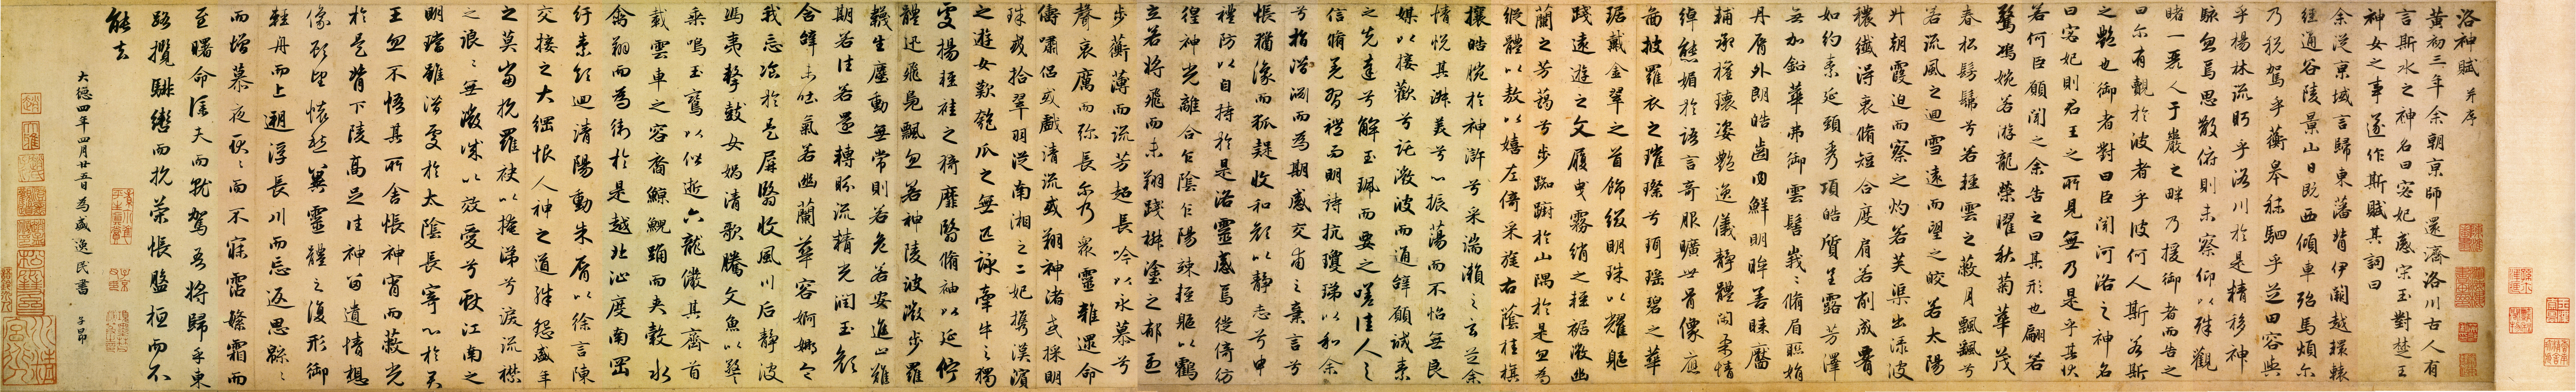 Chinese Characters Calligraphy Text 16800x2554